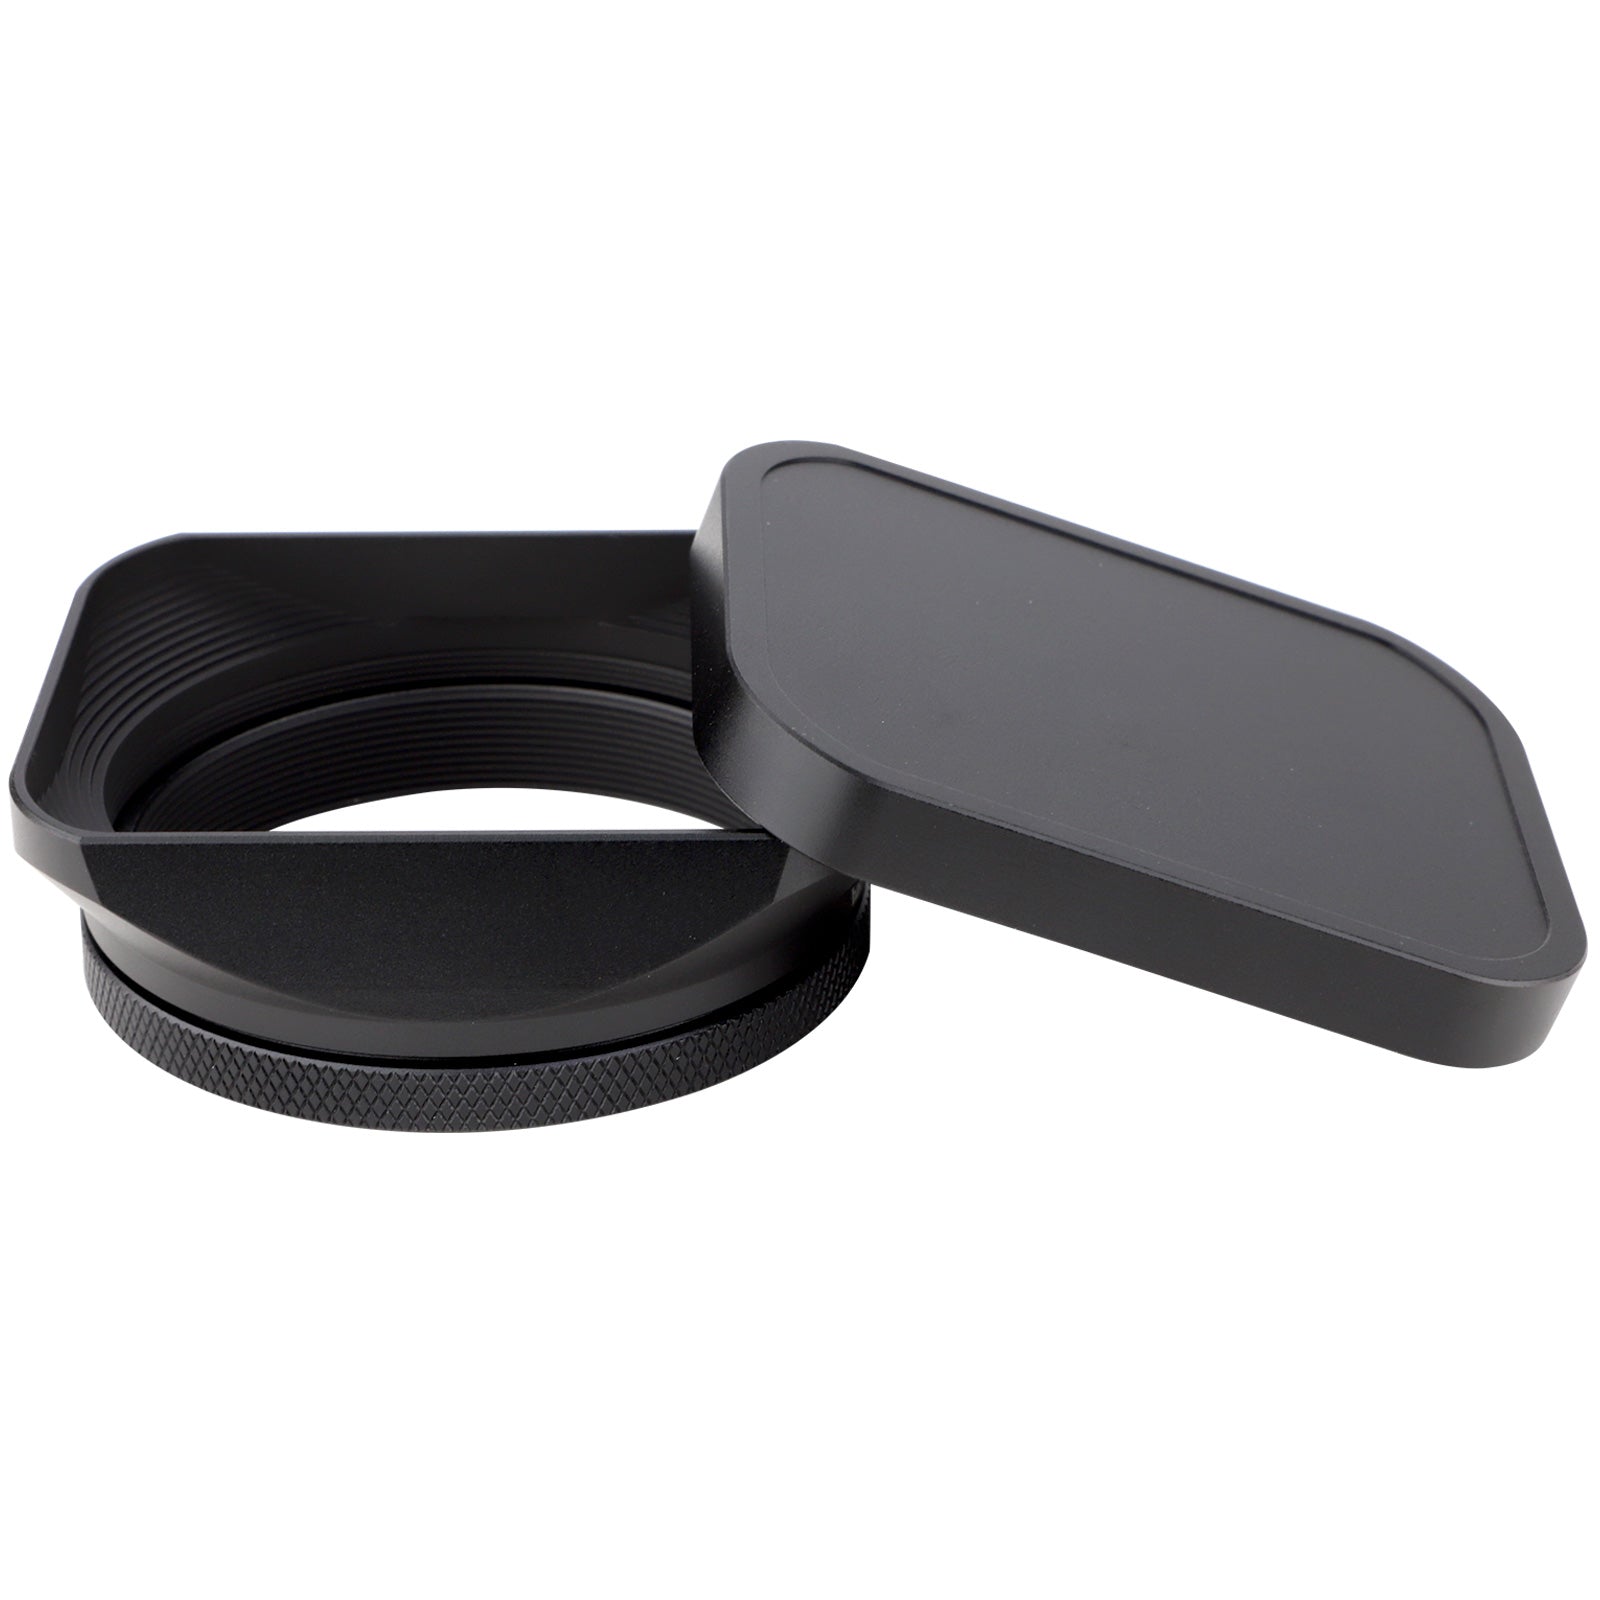 Haoge LH-X200B Square Metal Lens Hood with 49mm Adapter Ring for Fujifilm Fuji X100V X100F X100T X100S X70 Fuji Photo Camera Accessories Black